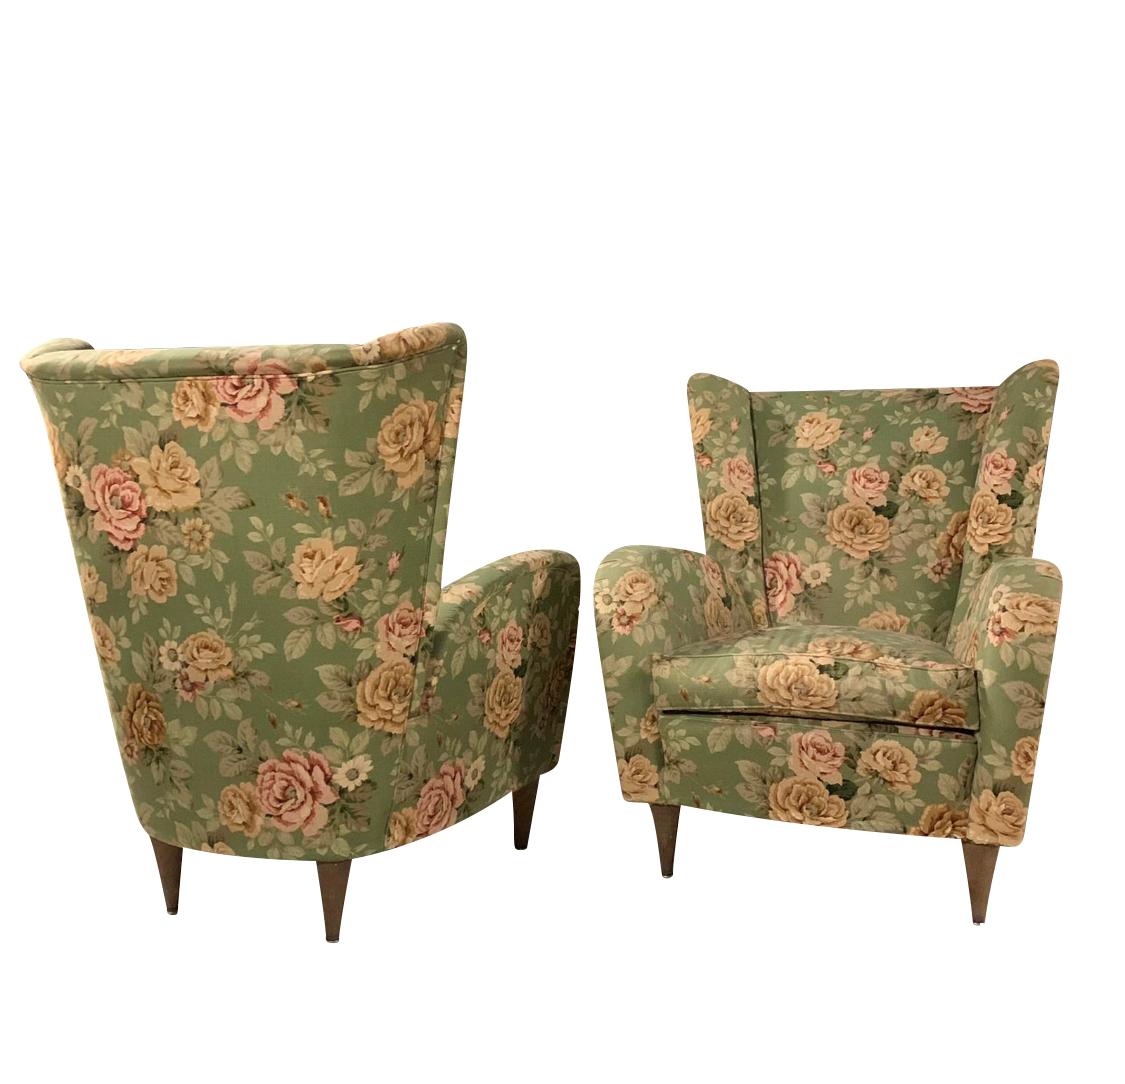 Paolo Buffa style pair of armchairs in original 50's floral fabric and tapered wooden feet.

Chairs can be reupholstered per clients design requirements.